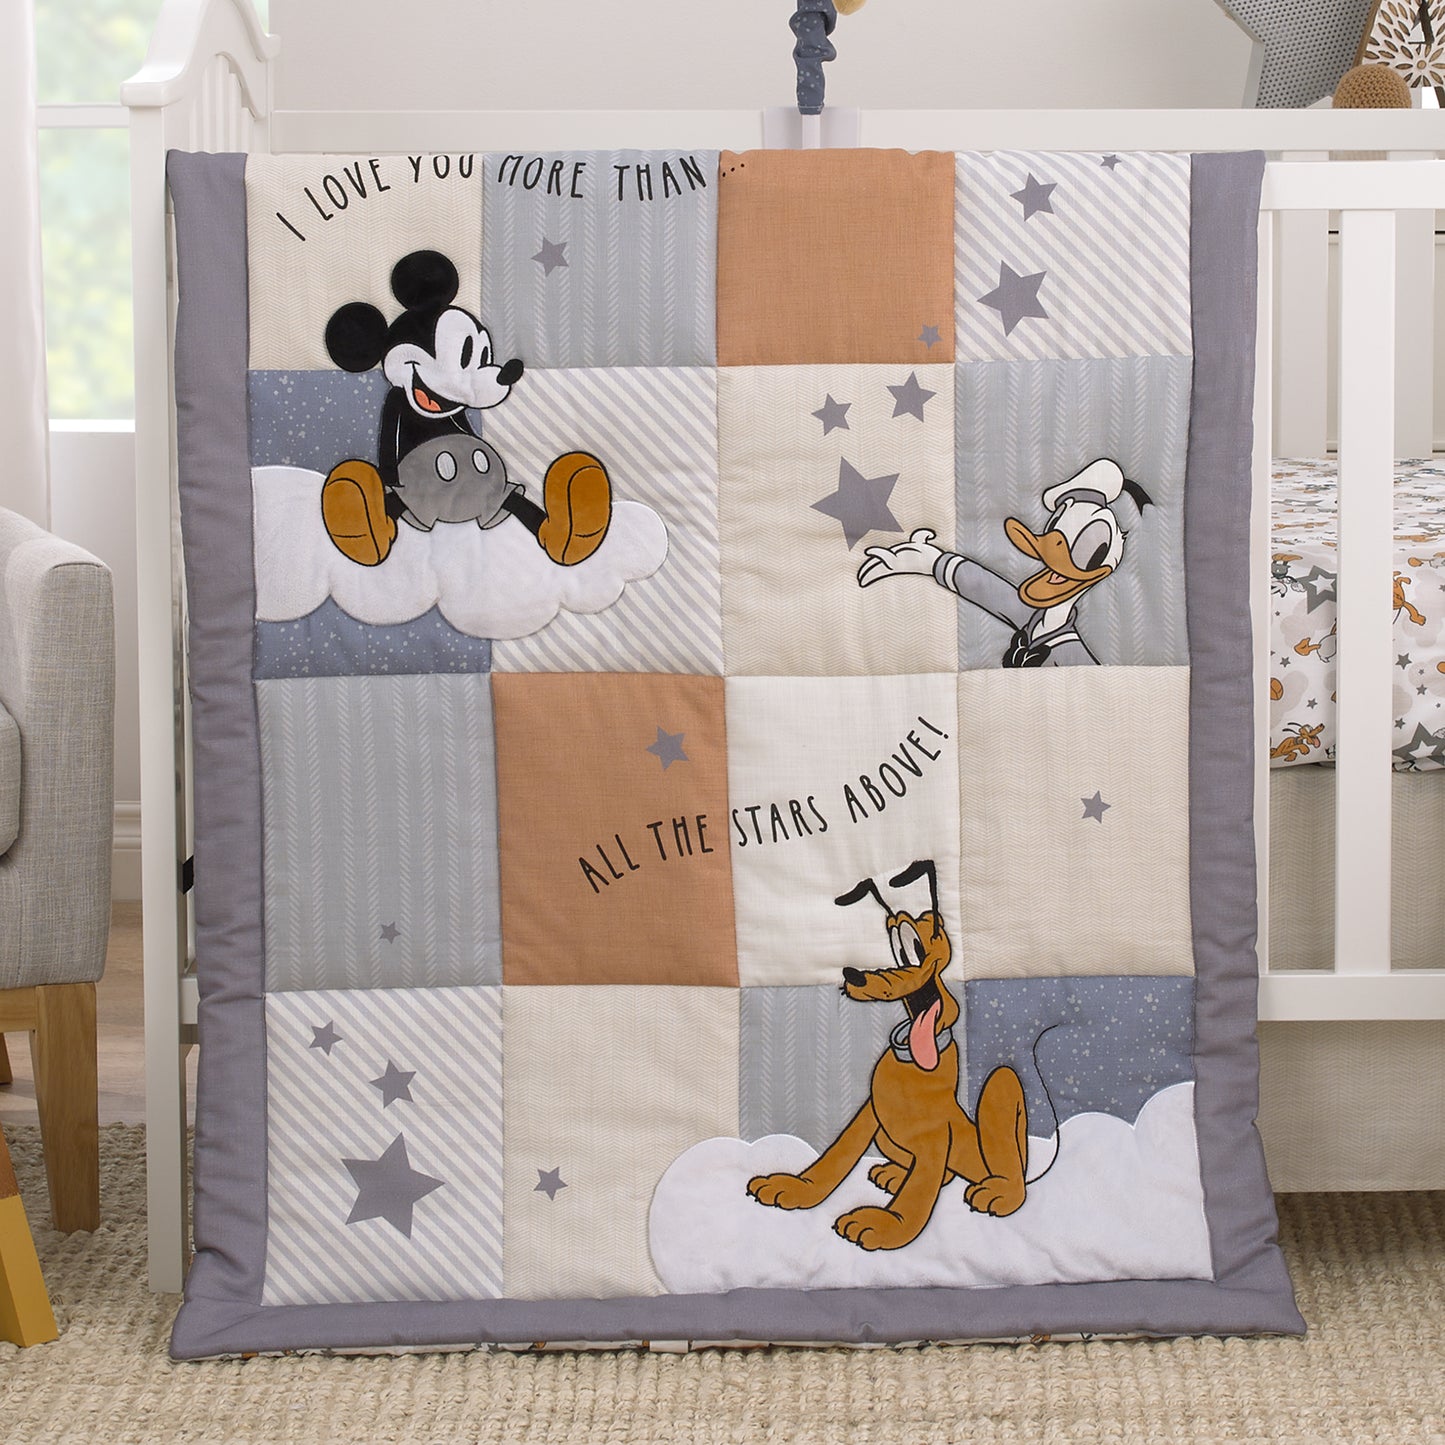 Disney Mickey Mouse Love Mickey Gray, Navy, and Tan Donald Duck and Pluto, Clouds and Stars 3 Piece Nursery Crib Bedding Set - Comforter, Fitted Crib Sheet, and Crib Skirt